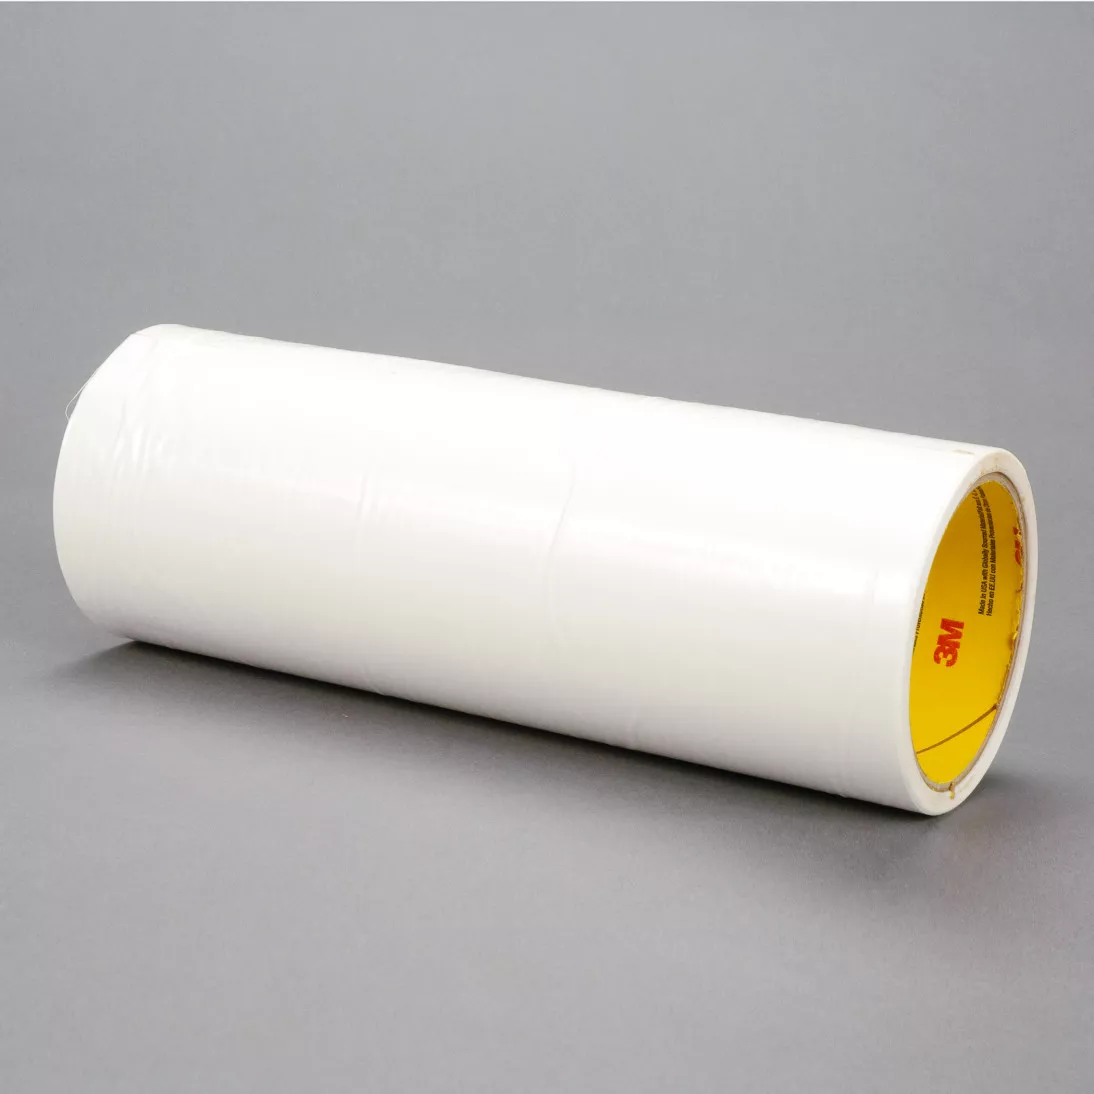 3M™ Double Coated Tape 9817M, Clear, 60 in x 250 yd, 3.3 mil, 1 roll per
case, 9 rolls per pallet